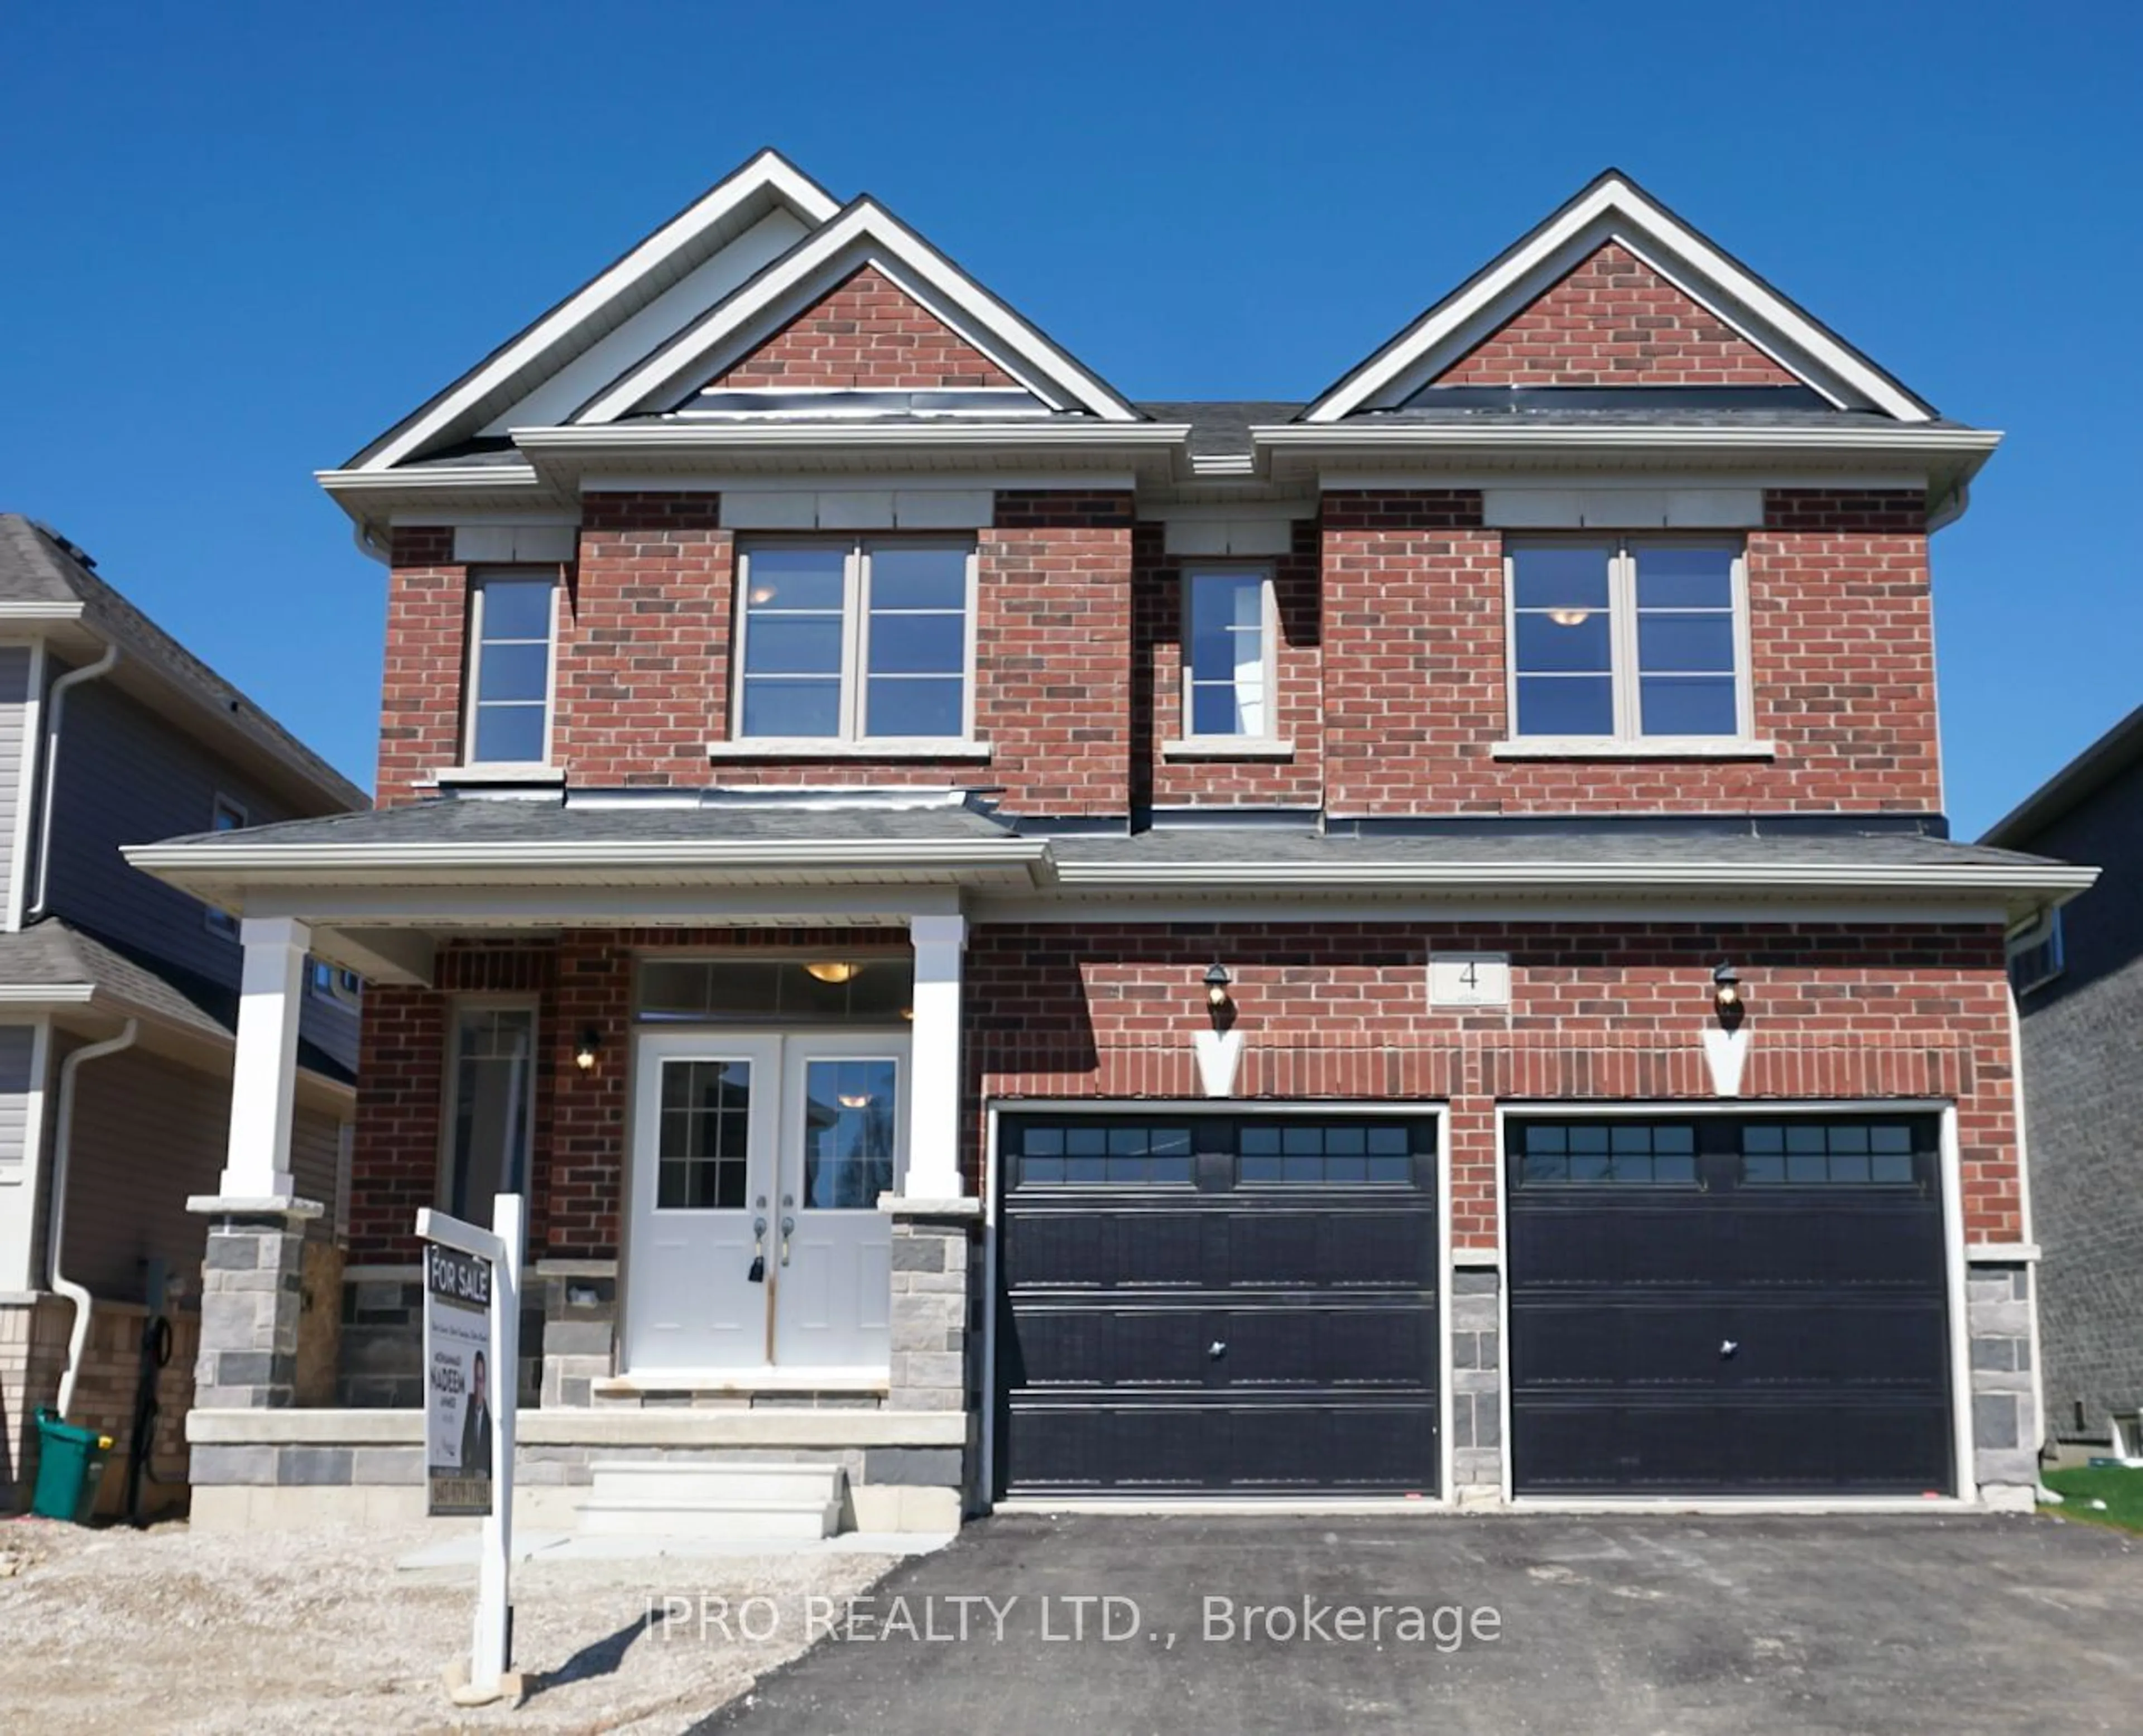 Home with brick exterior material for 4 Corbett St, Southgate Ontario N0C 1B0